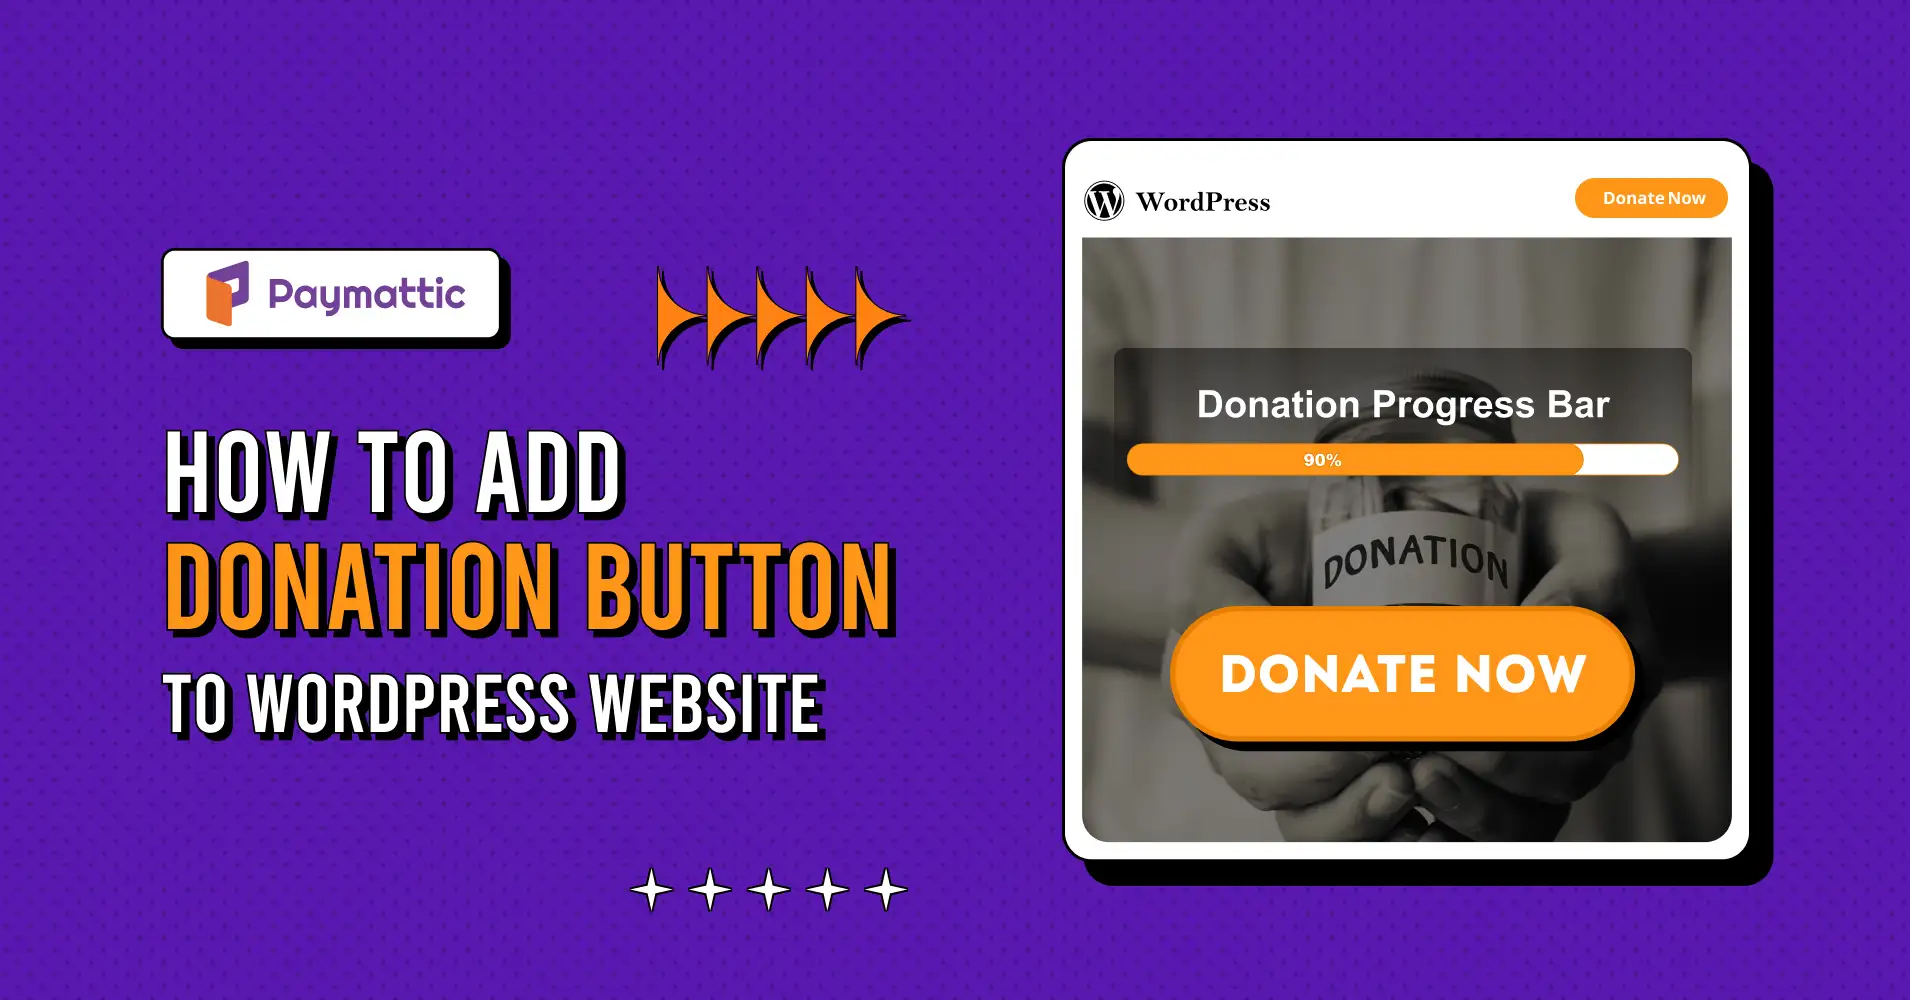 How To Add Donation Button To WordPress Website?